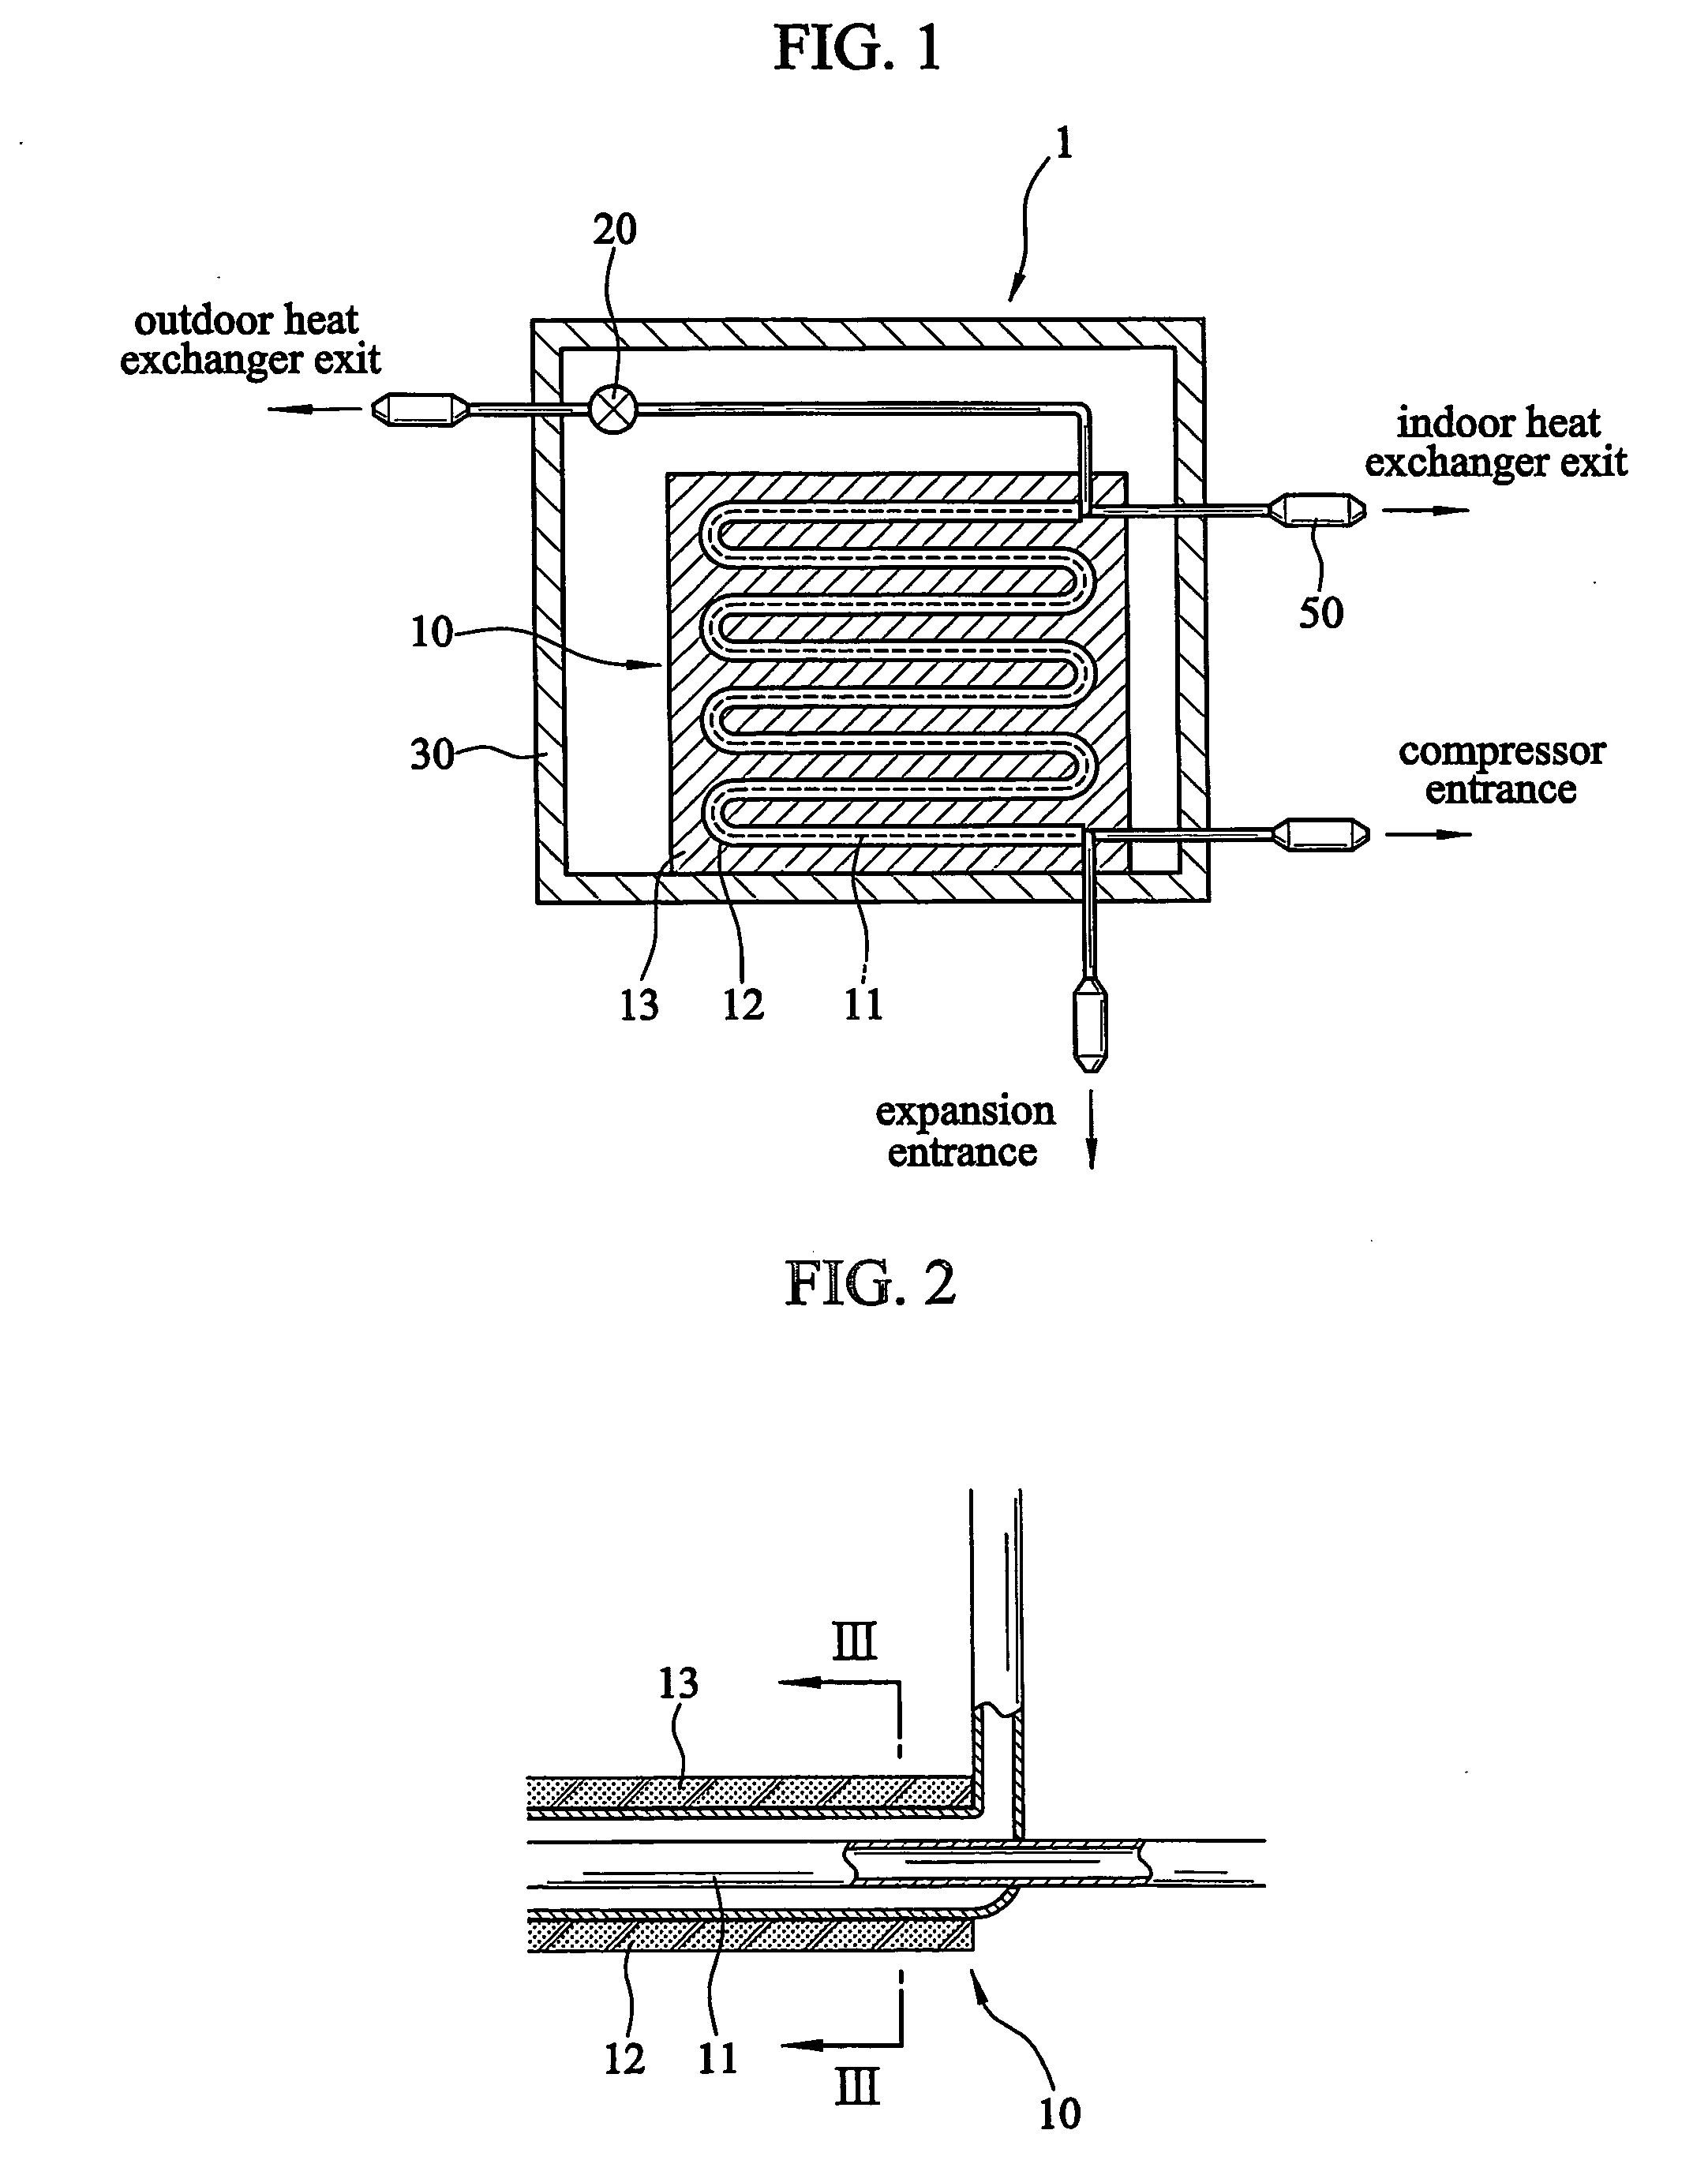 System of energy efficiency for refrigeration cycle